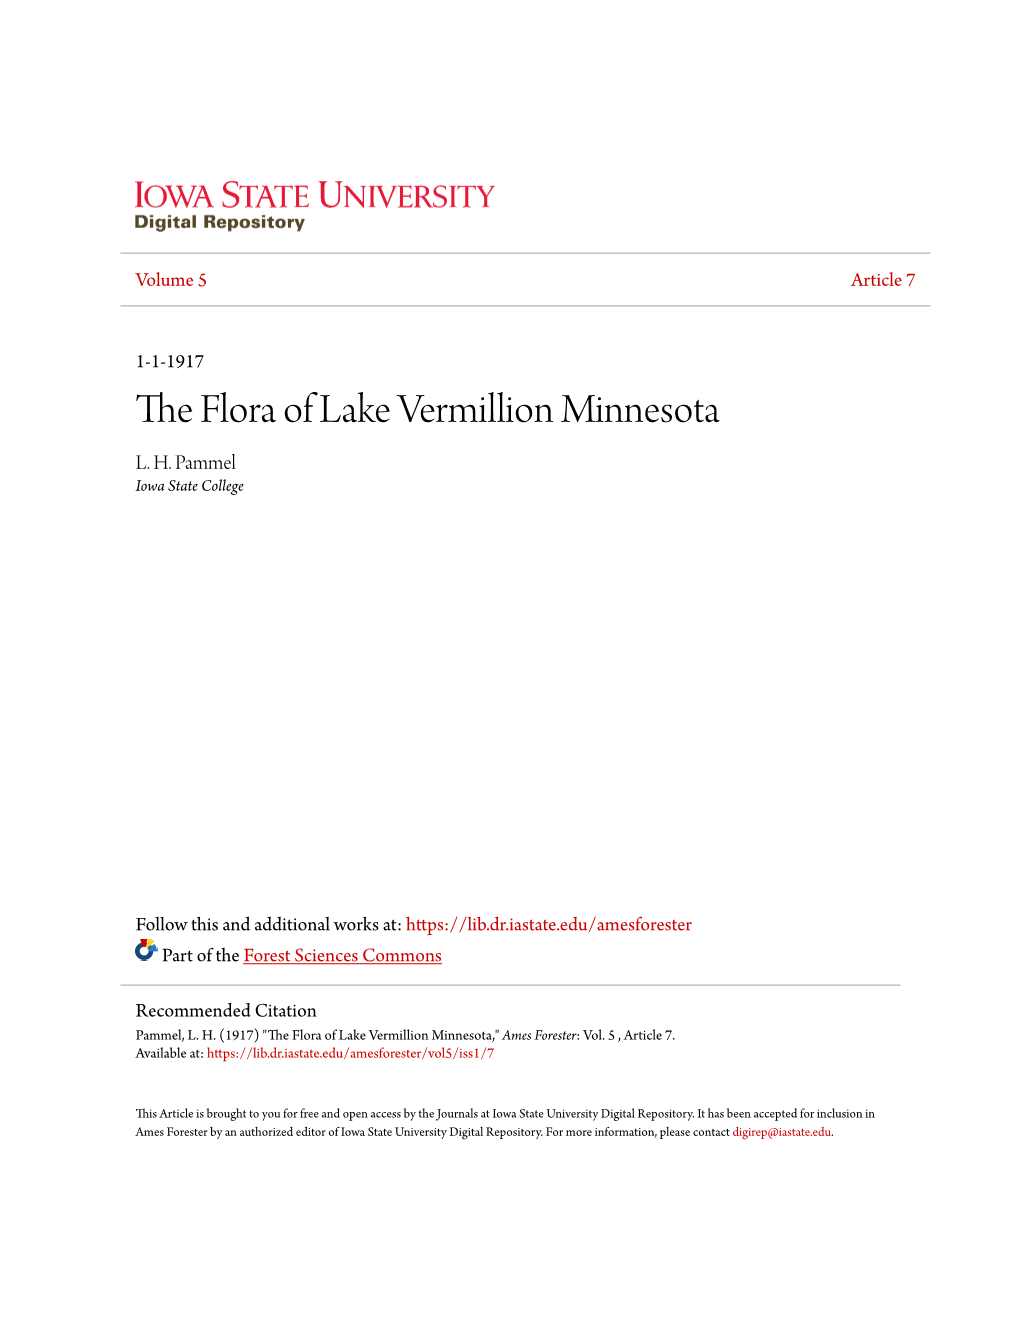 The Flora of Lake Vermillion Minnesota," Ames Forester: Vol